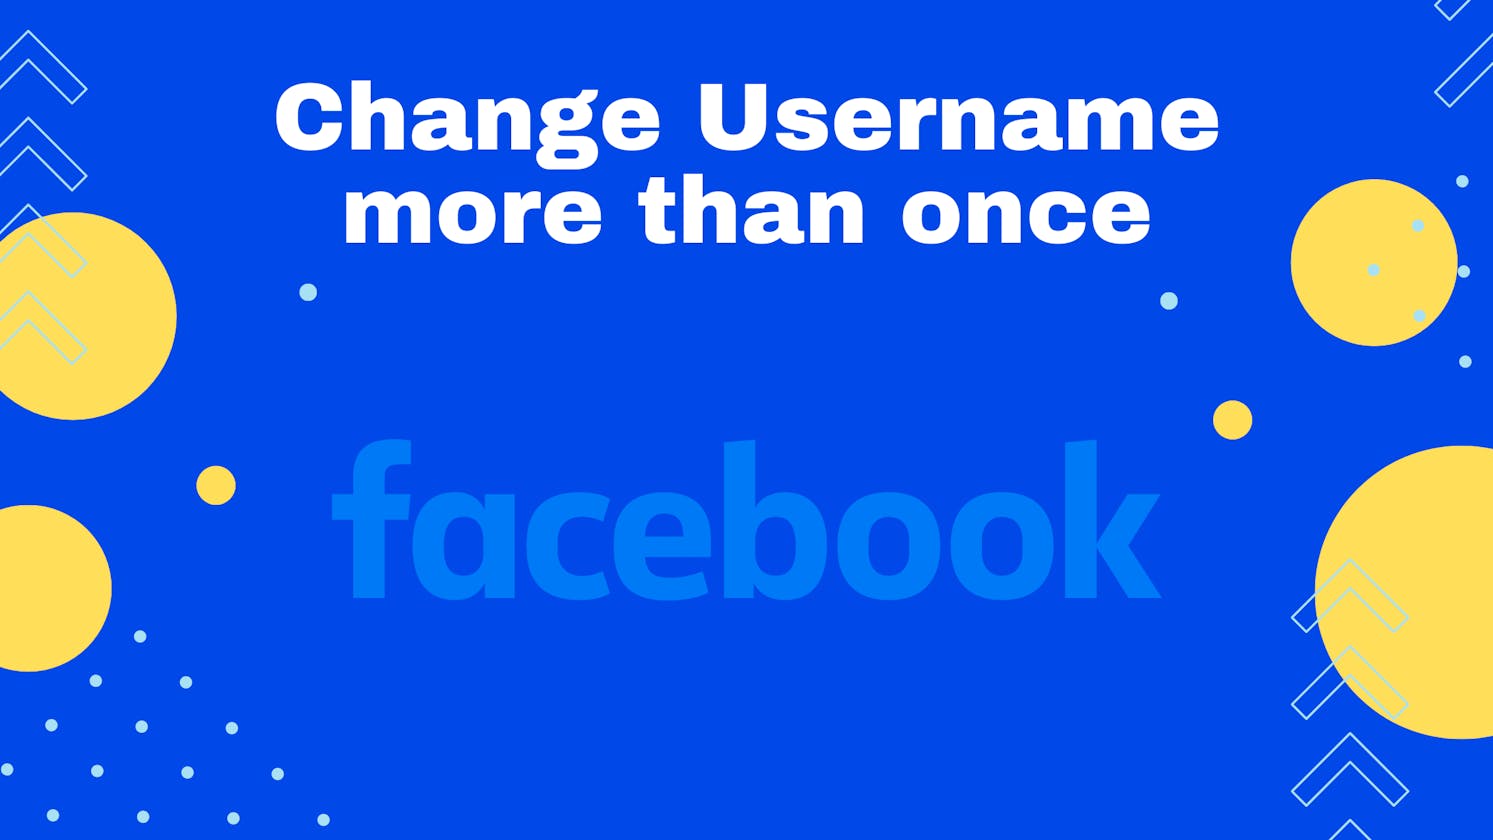 Change Facebook username more than once